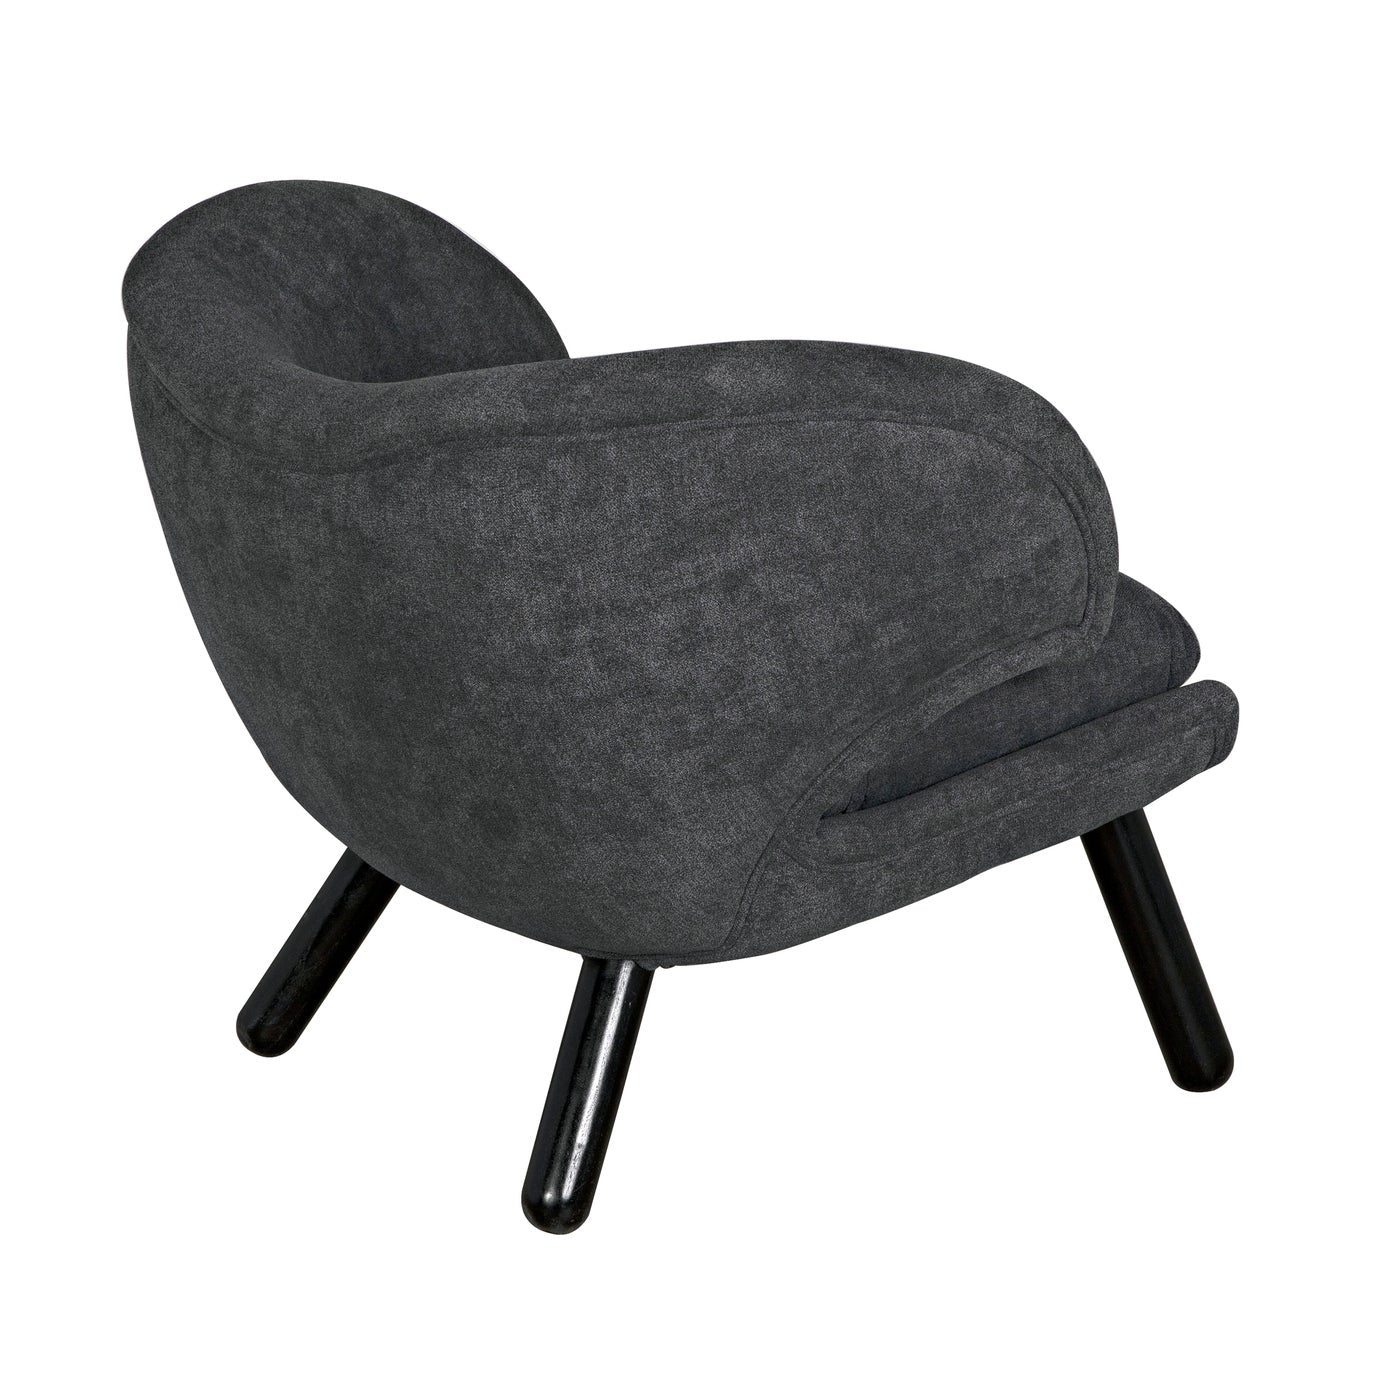 Valerie Chair with Grey Fabric